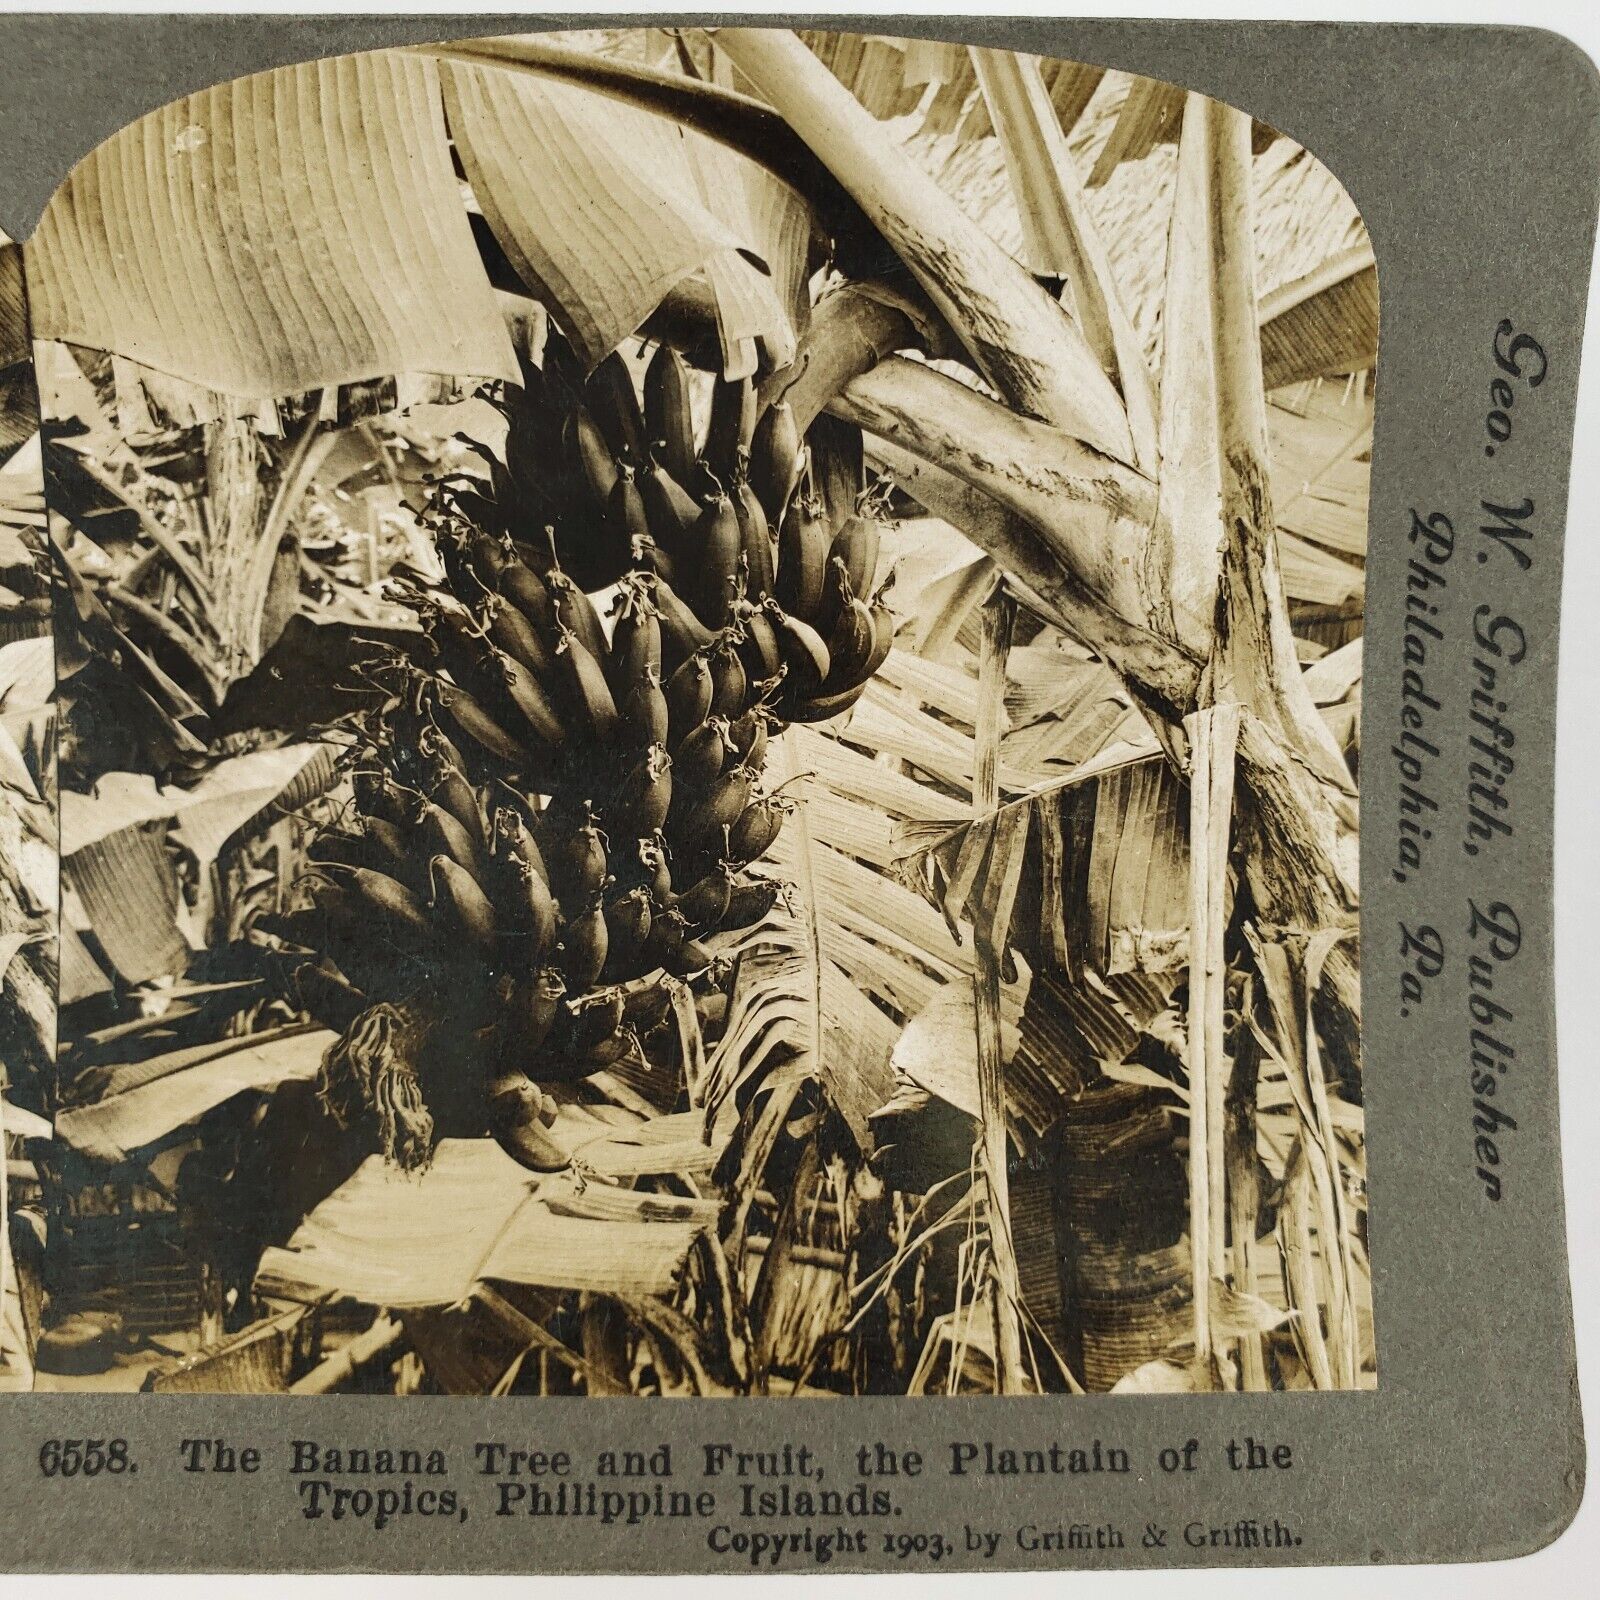 Philippines Banana Tree Fruit Stereoview c1903 Griffith Palm Leaves Photo H1267